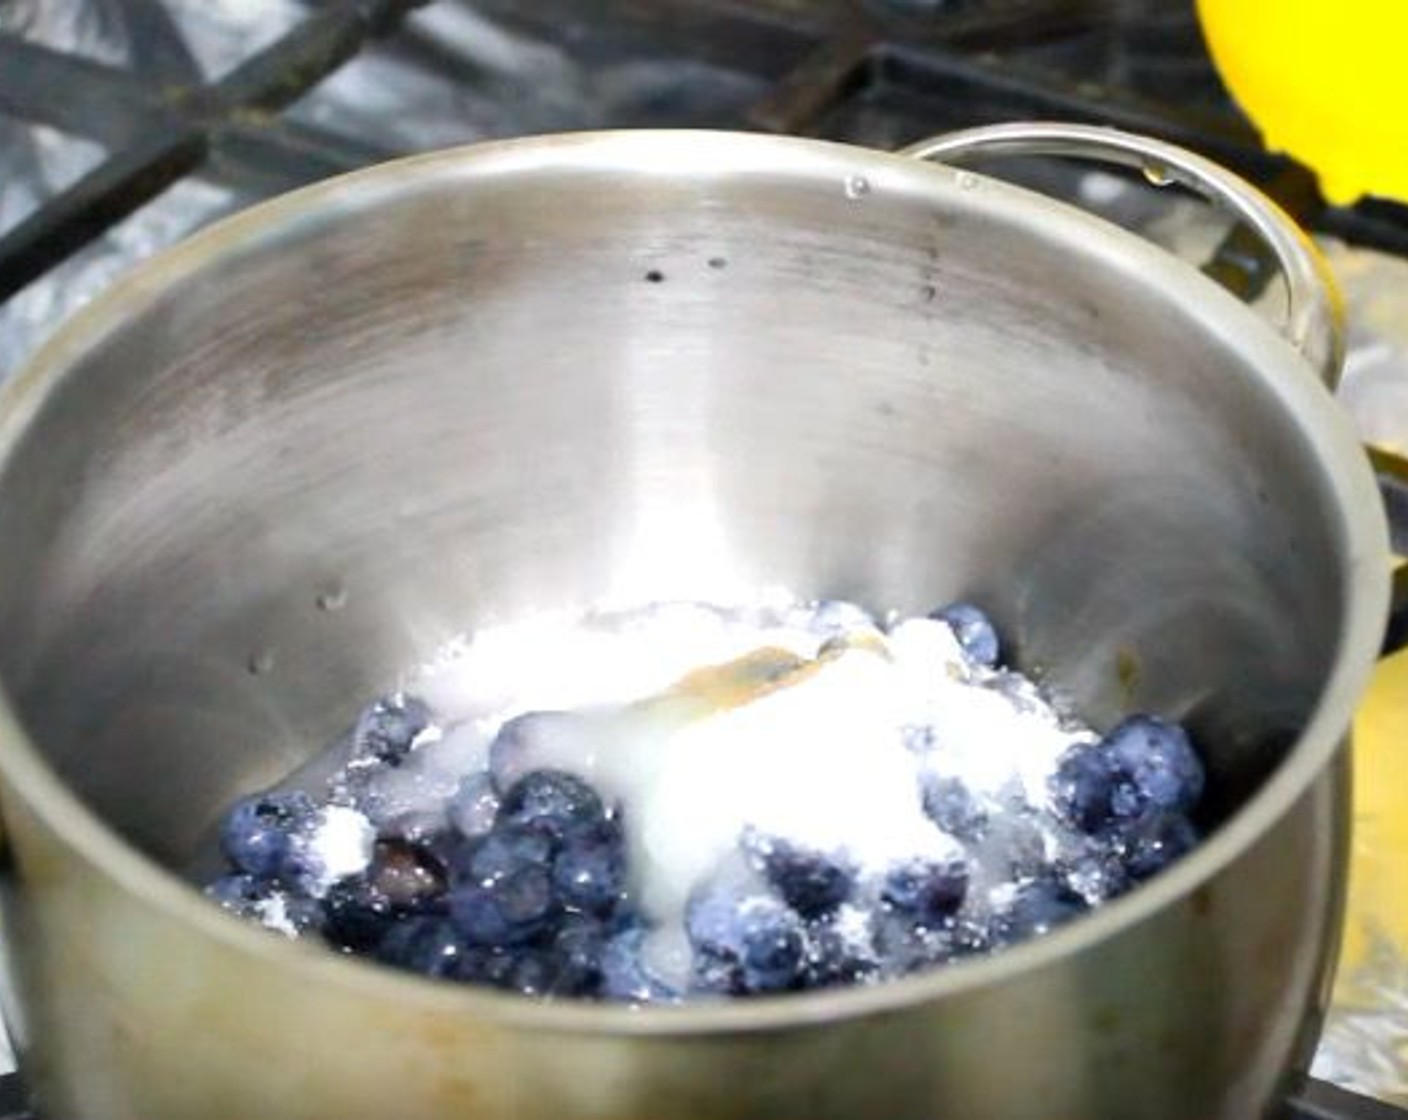 step 11 In a saucepan, add Fresh Blueberries (2 cups), Granulated Sugar (1/3 cup), Vanilla Extract (1/4 tsp), Water (1/4 cup), and juice from Lemon (1). Bring mixture to a boil. Reduce heat to low and cook for 15 minutes.